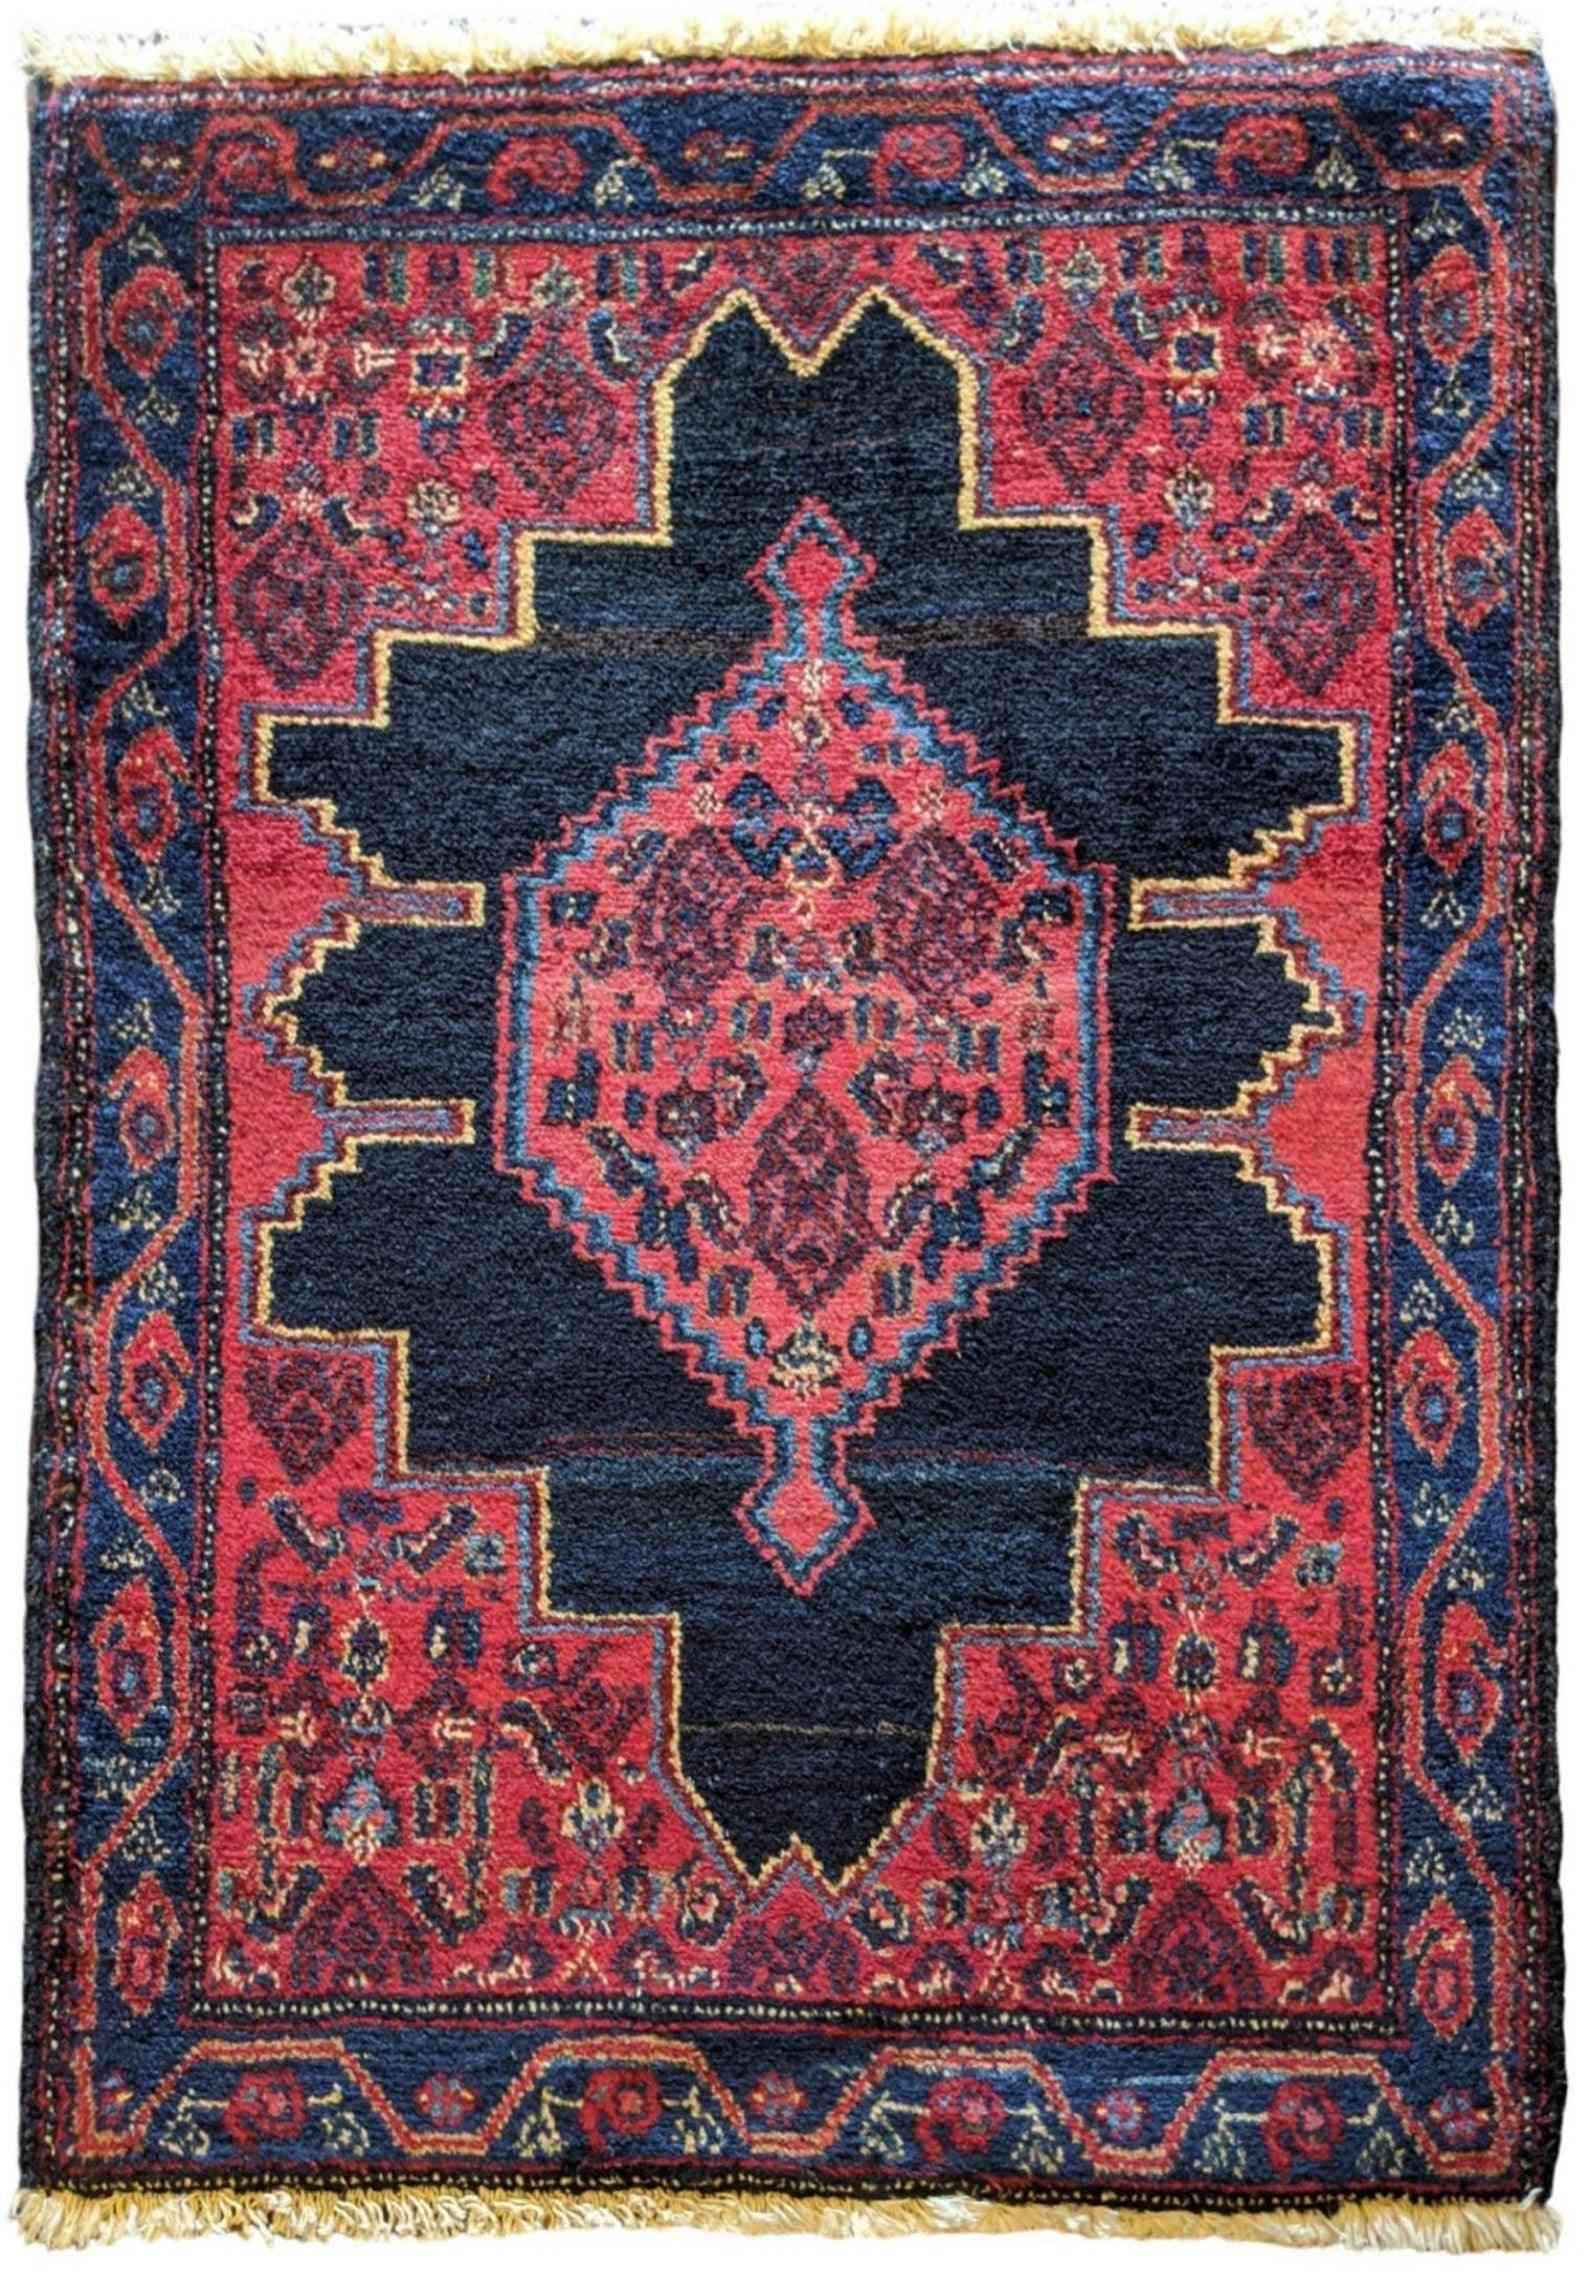 82 x 64 cm Persian Senneh Red Small Rug - Rugmaster